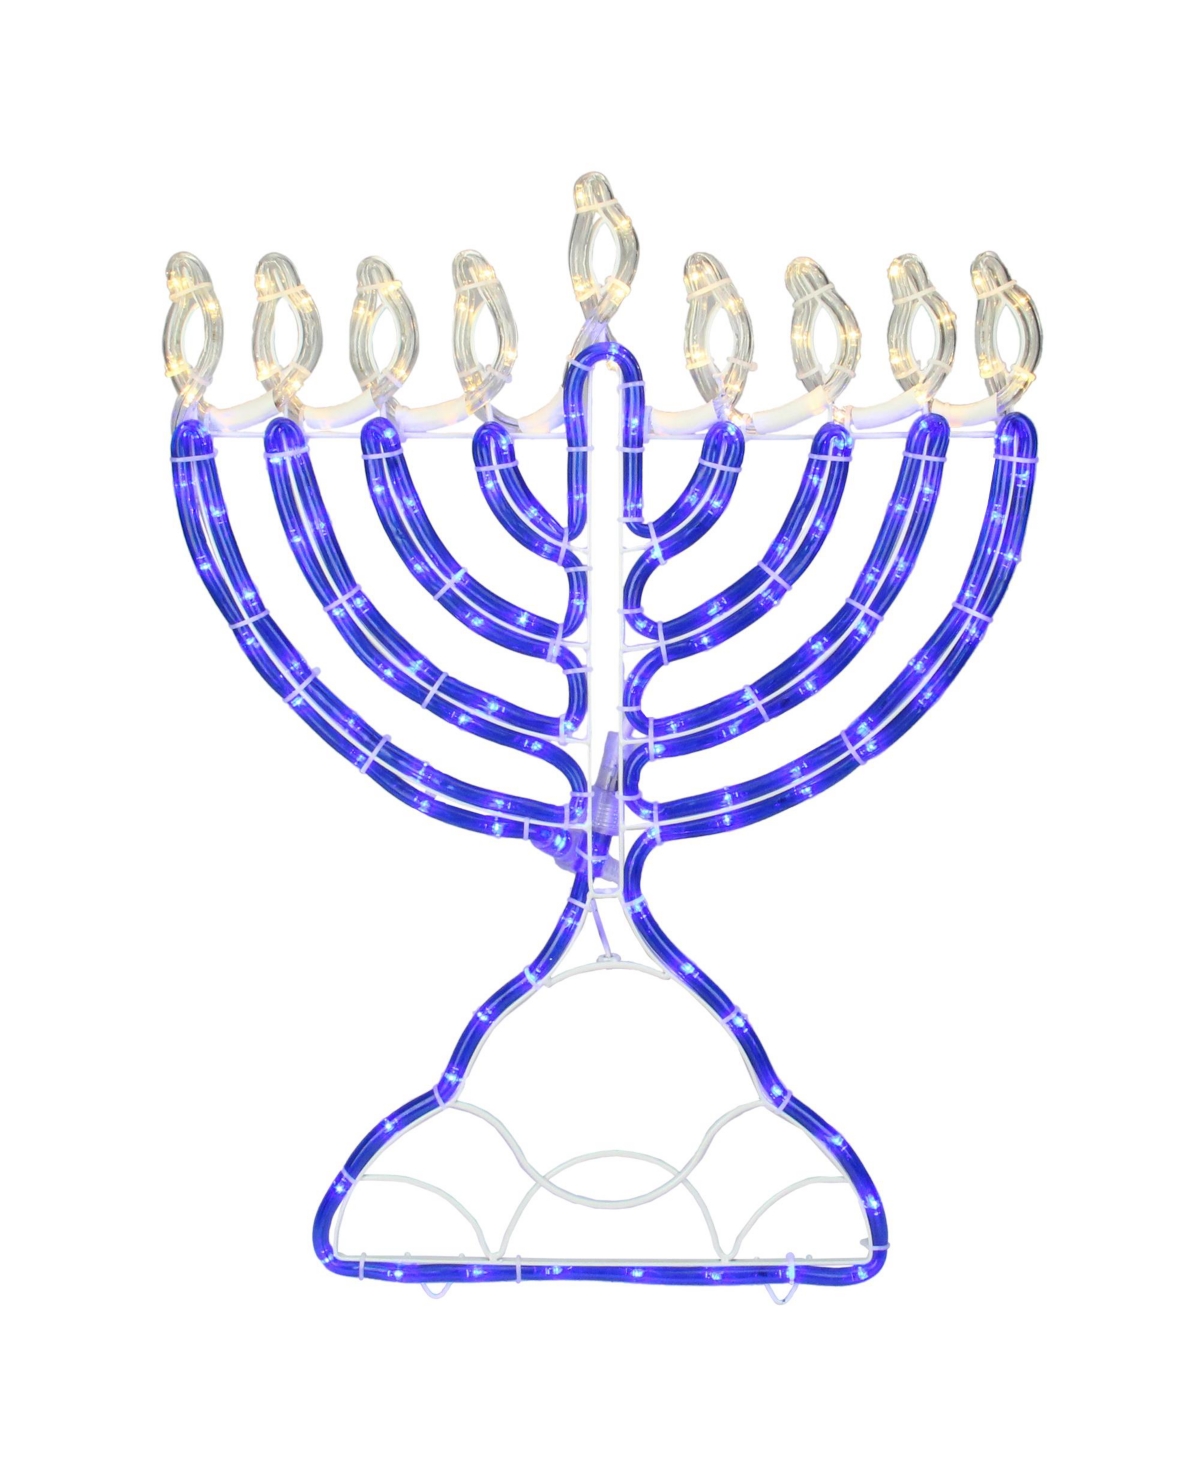 Shop Northlight 150 Clear And Blue Led Hanukkah Menorah Rope Lights, 1.4 Feet White Wire